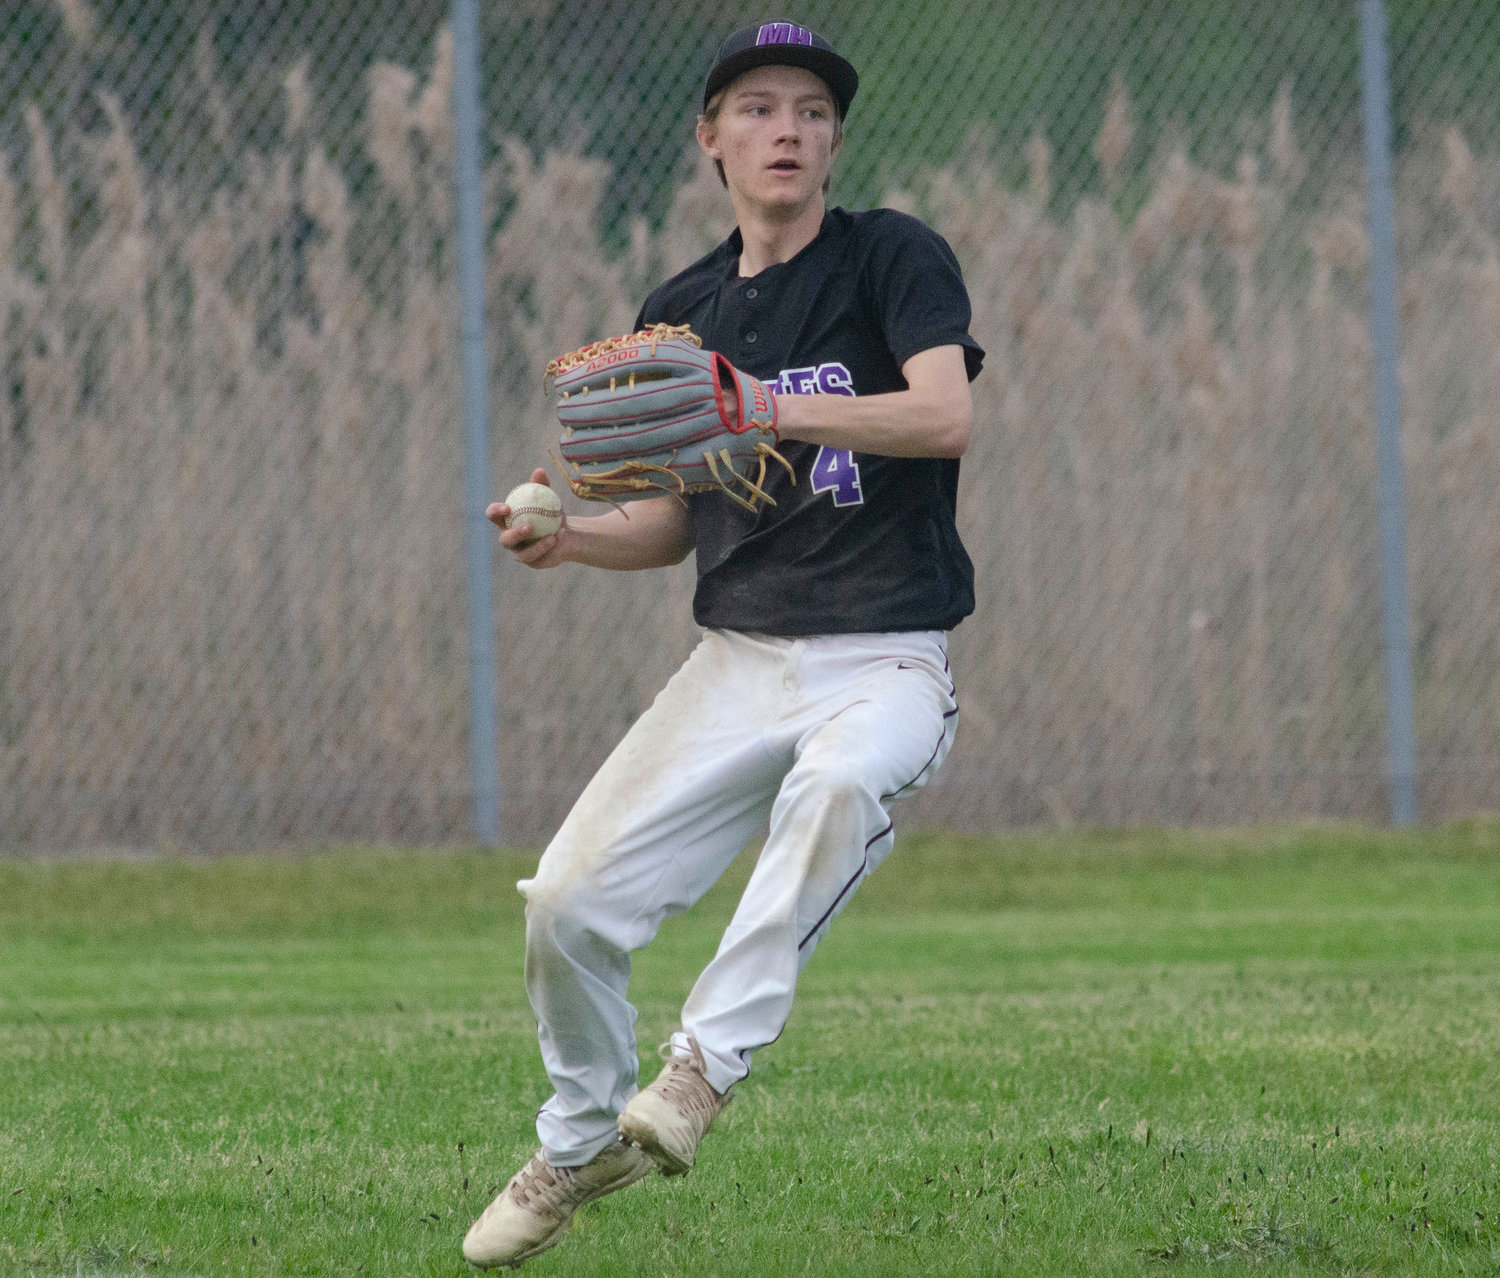 Mt. Hope left fielder Caleb DeCastro throws the ball in after retrieving an East Providence hit.